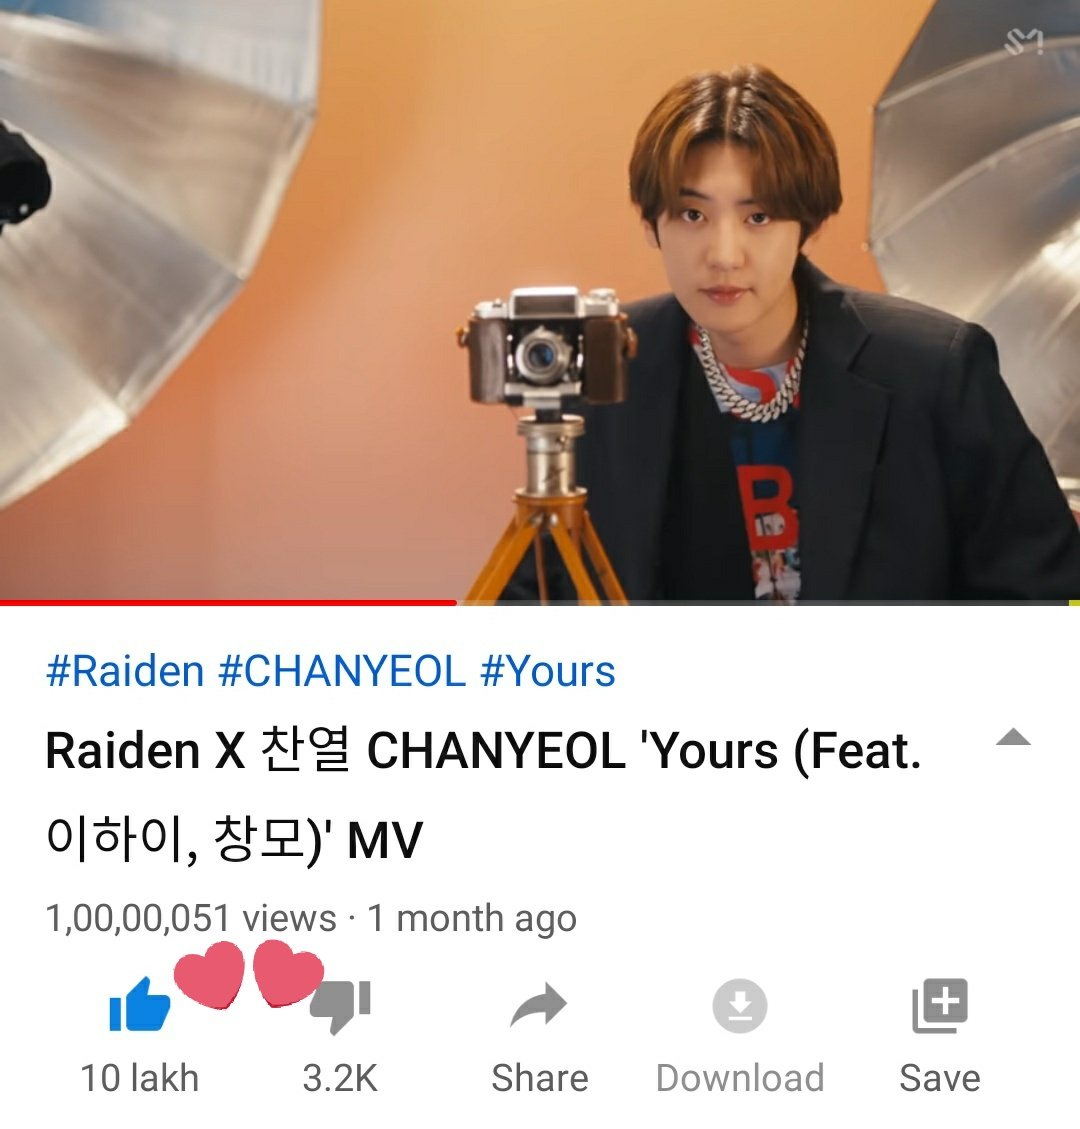 Congratulations! #CHANYEOL x Raiden's 'YOURS' song has surpassed 10 Million views on youtube🥳🎊

Lets continue streaming and cherish this song all time. Please like and leave positive comments❤️

🔗youtu.be/N2dsnGc7TFk

#WillBeYOURSForever
#찬열 #チャニョル #灿烈
@weareoneEXO